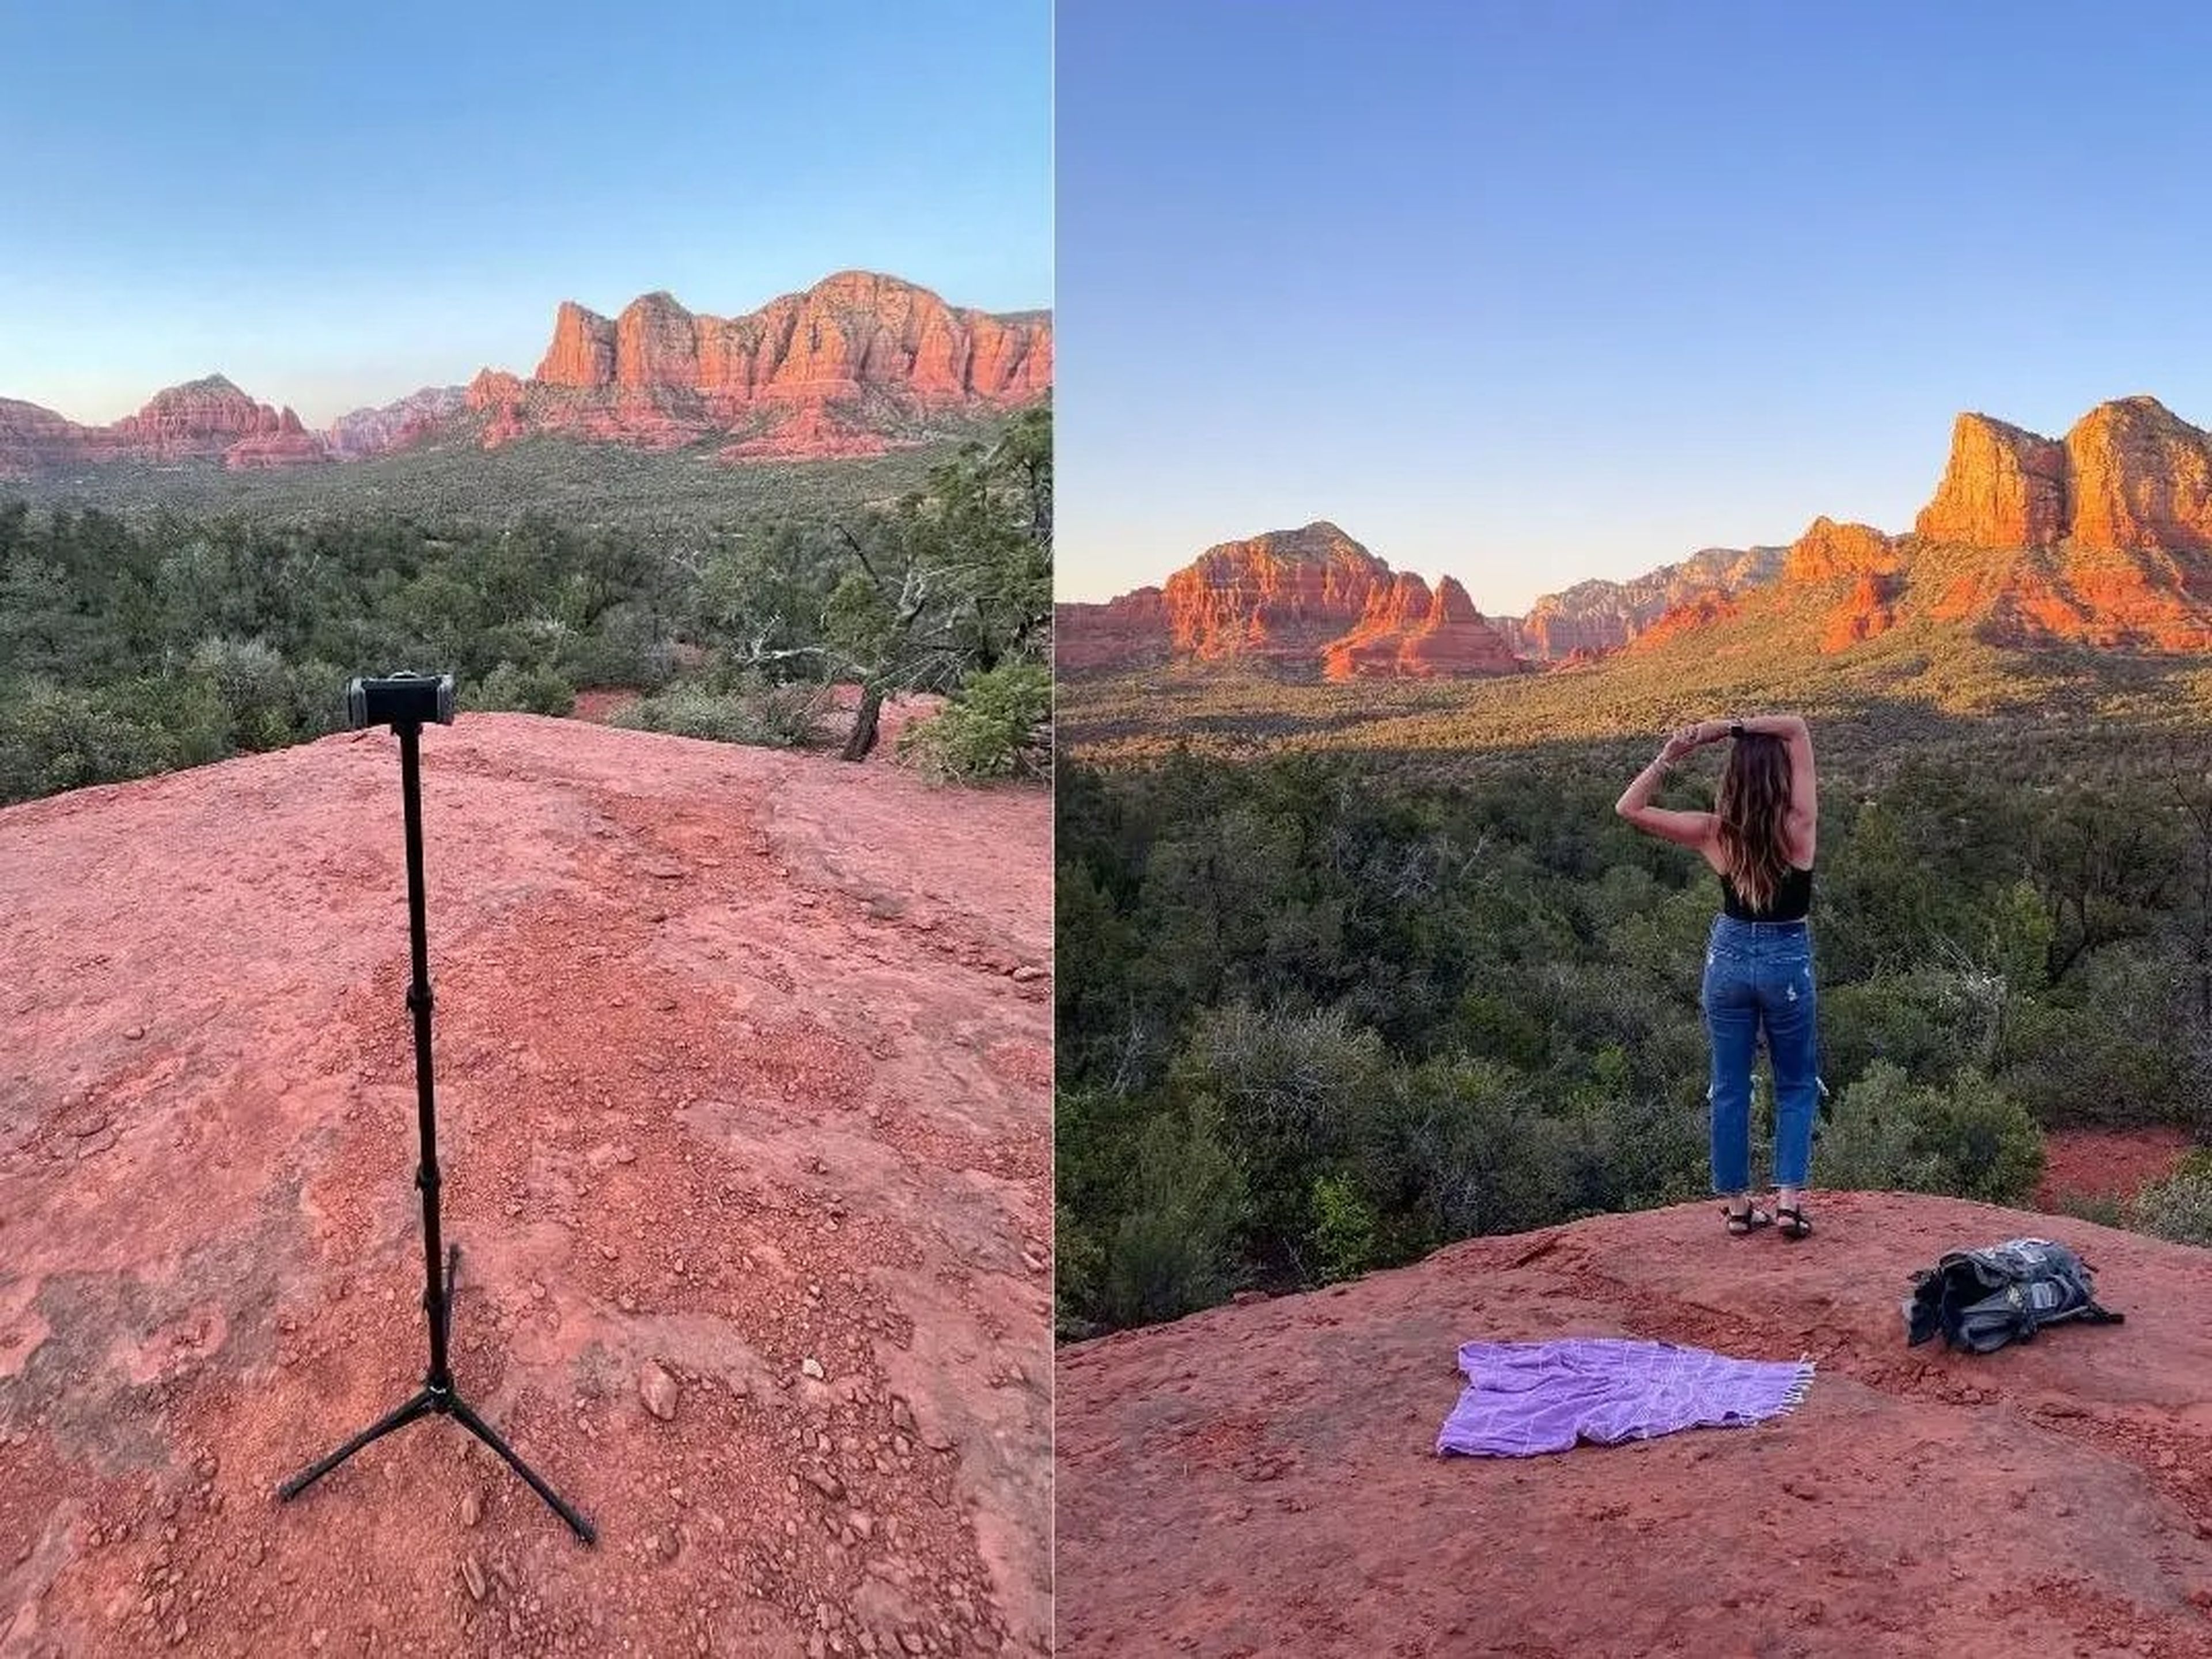 On the left, a smartphone tripod is set up on a red rock, overlooking trees and rock formations. On the right, Emily stands on a red rock with her arms stretched over her head, looking our at the trees and rock formations.